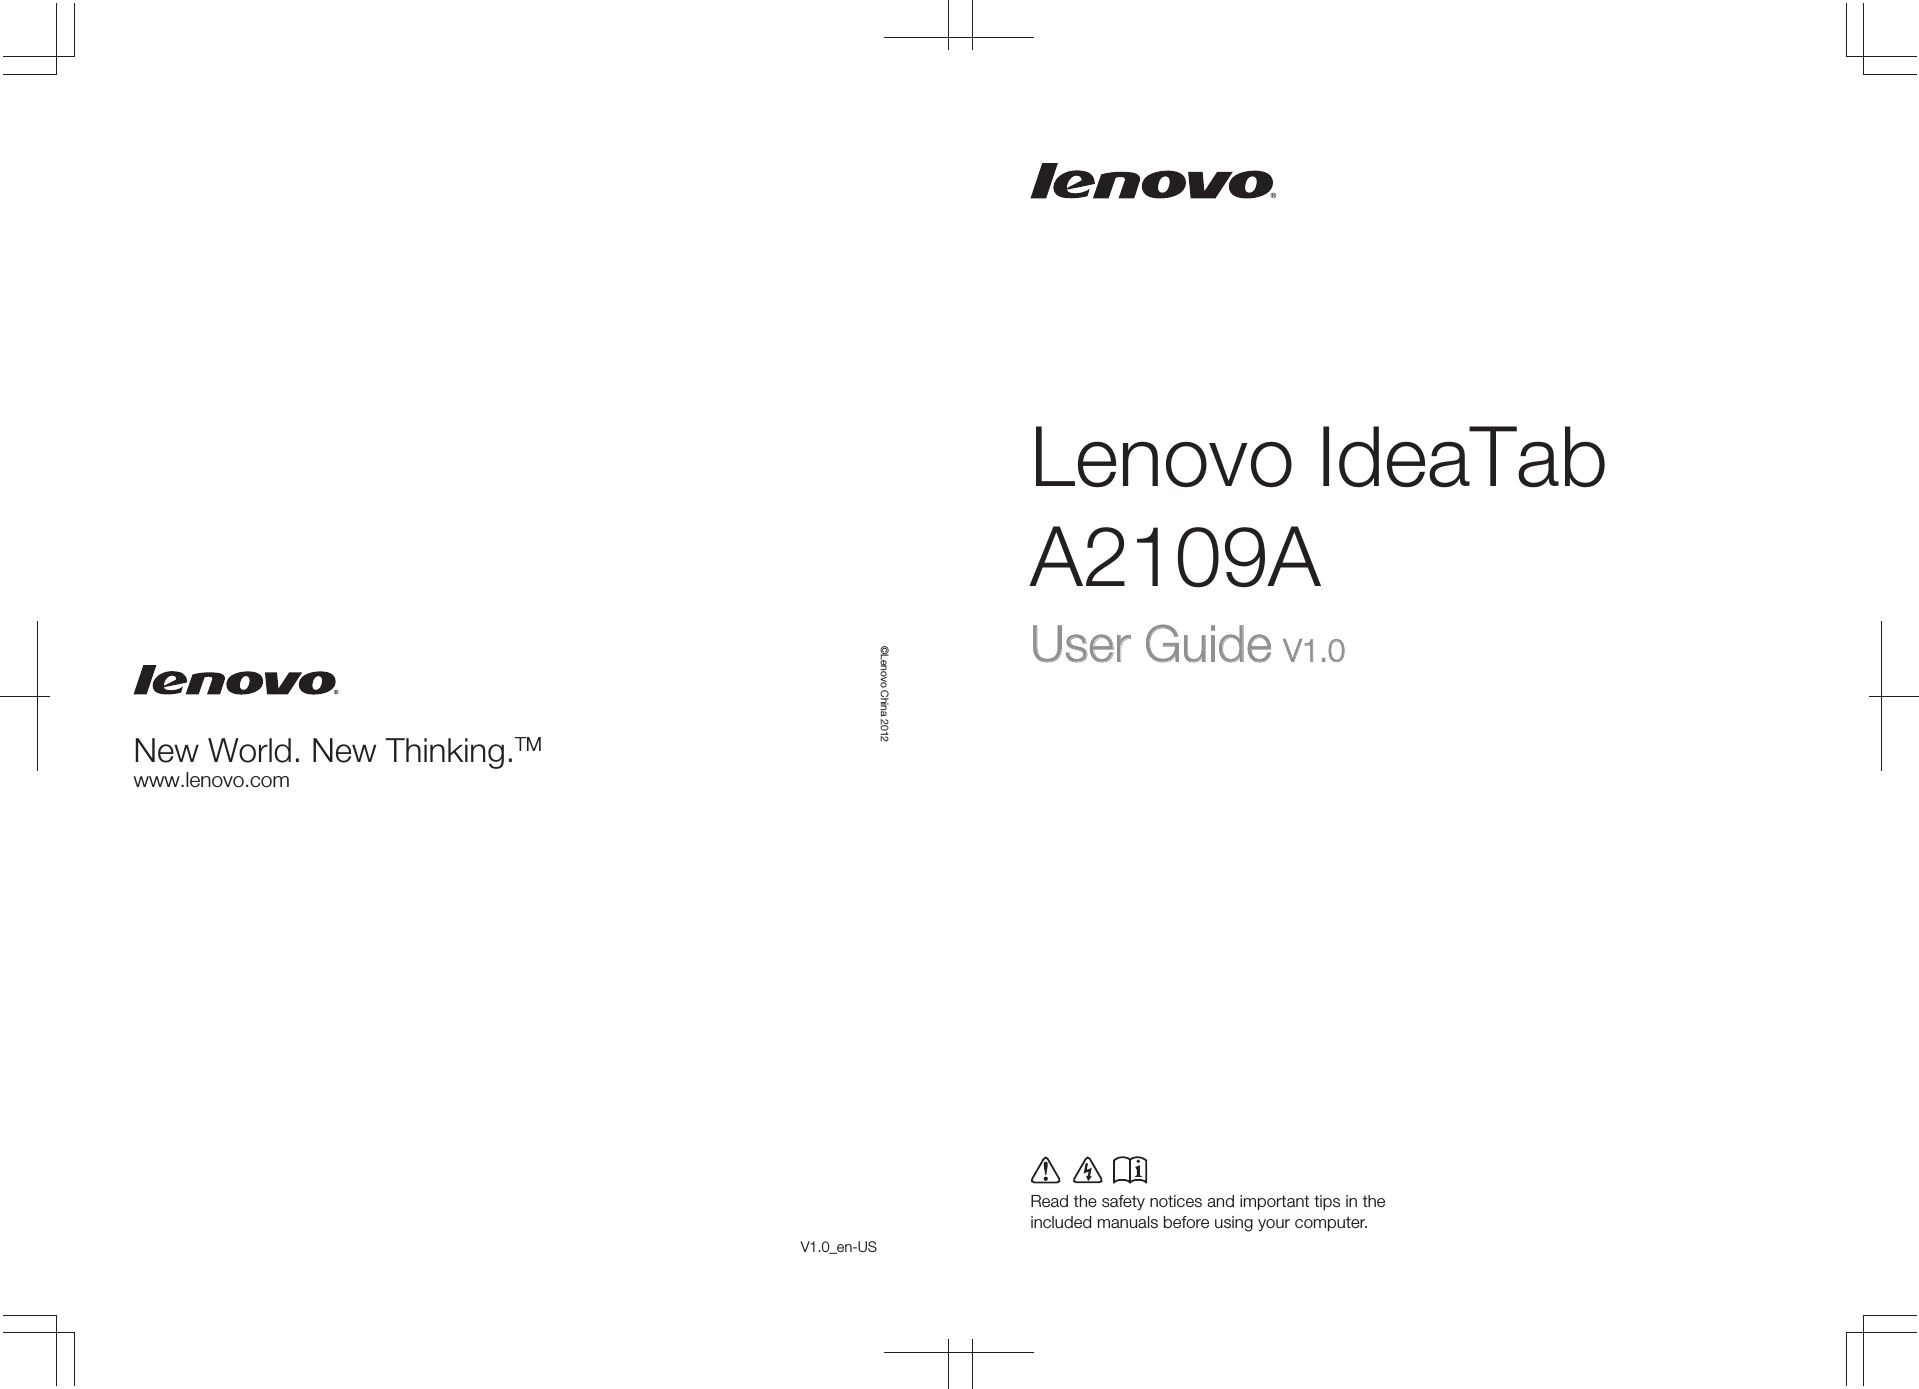 Lenovo IdeaTabA2109ARead the safety notices and important tips in the included manuals before using your computer.©Lenovo China 2012New World. New Thinking.TMwww.lenovo.comUser GuideUser Guide V1.0V1.0V1.0_en-US